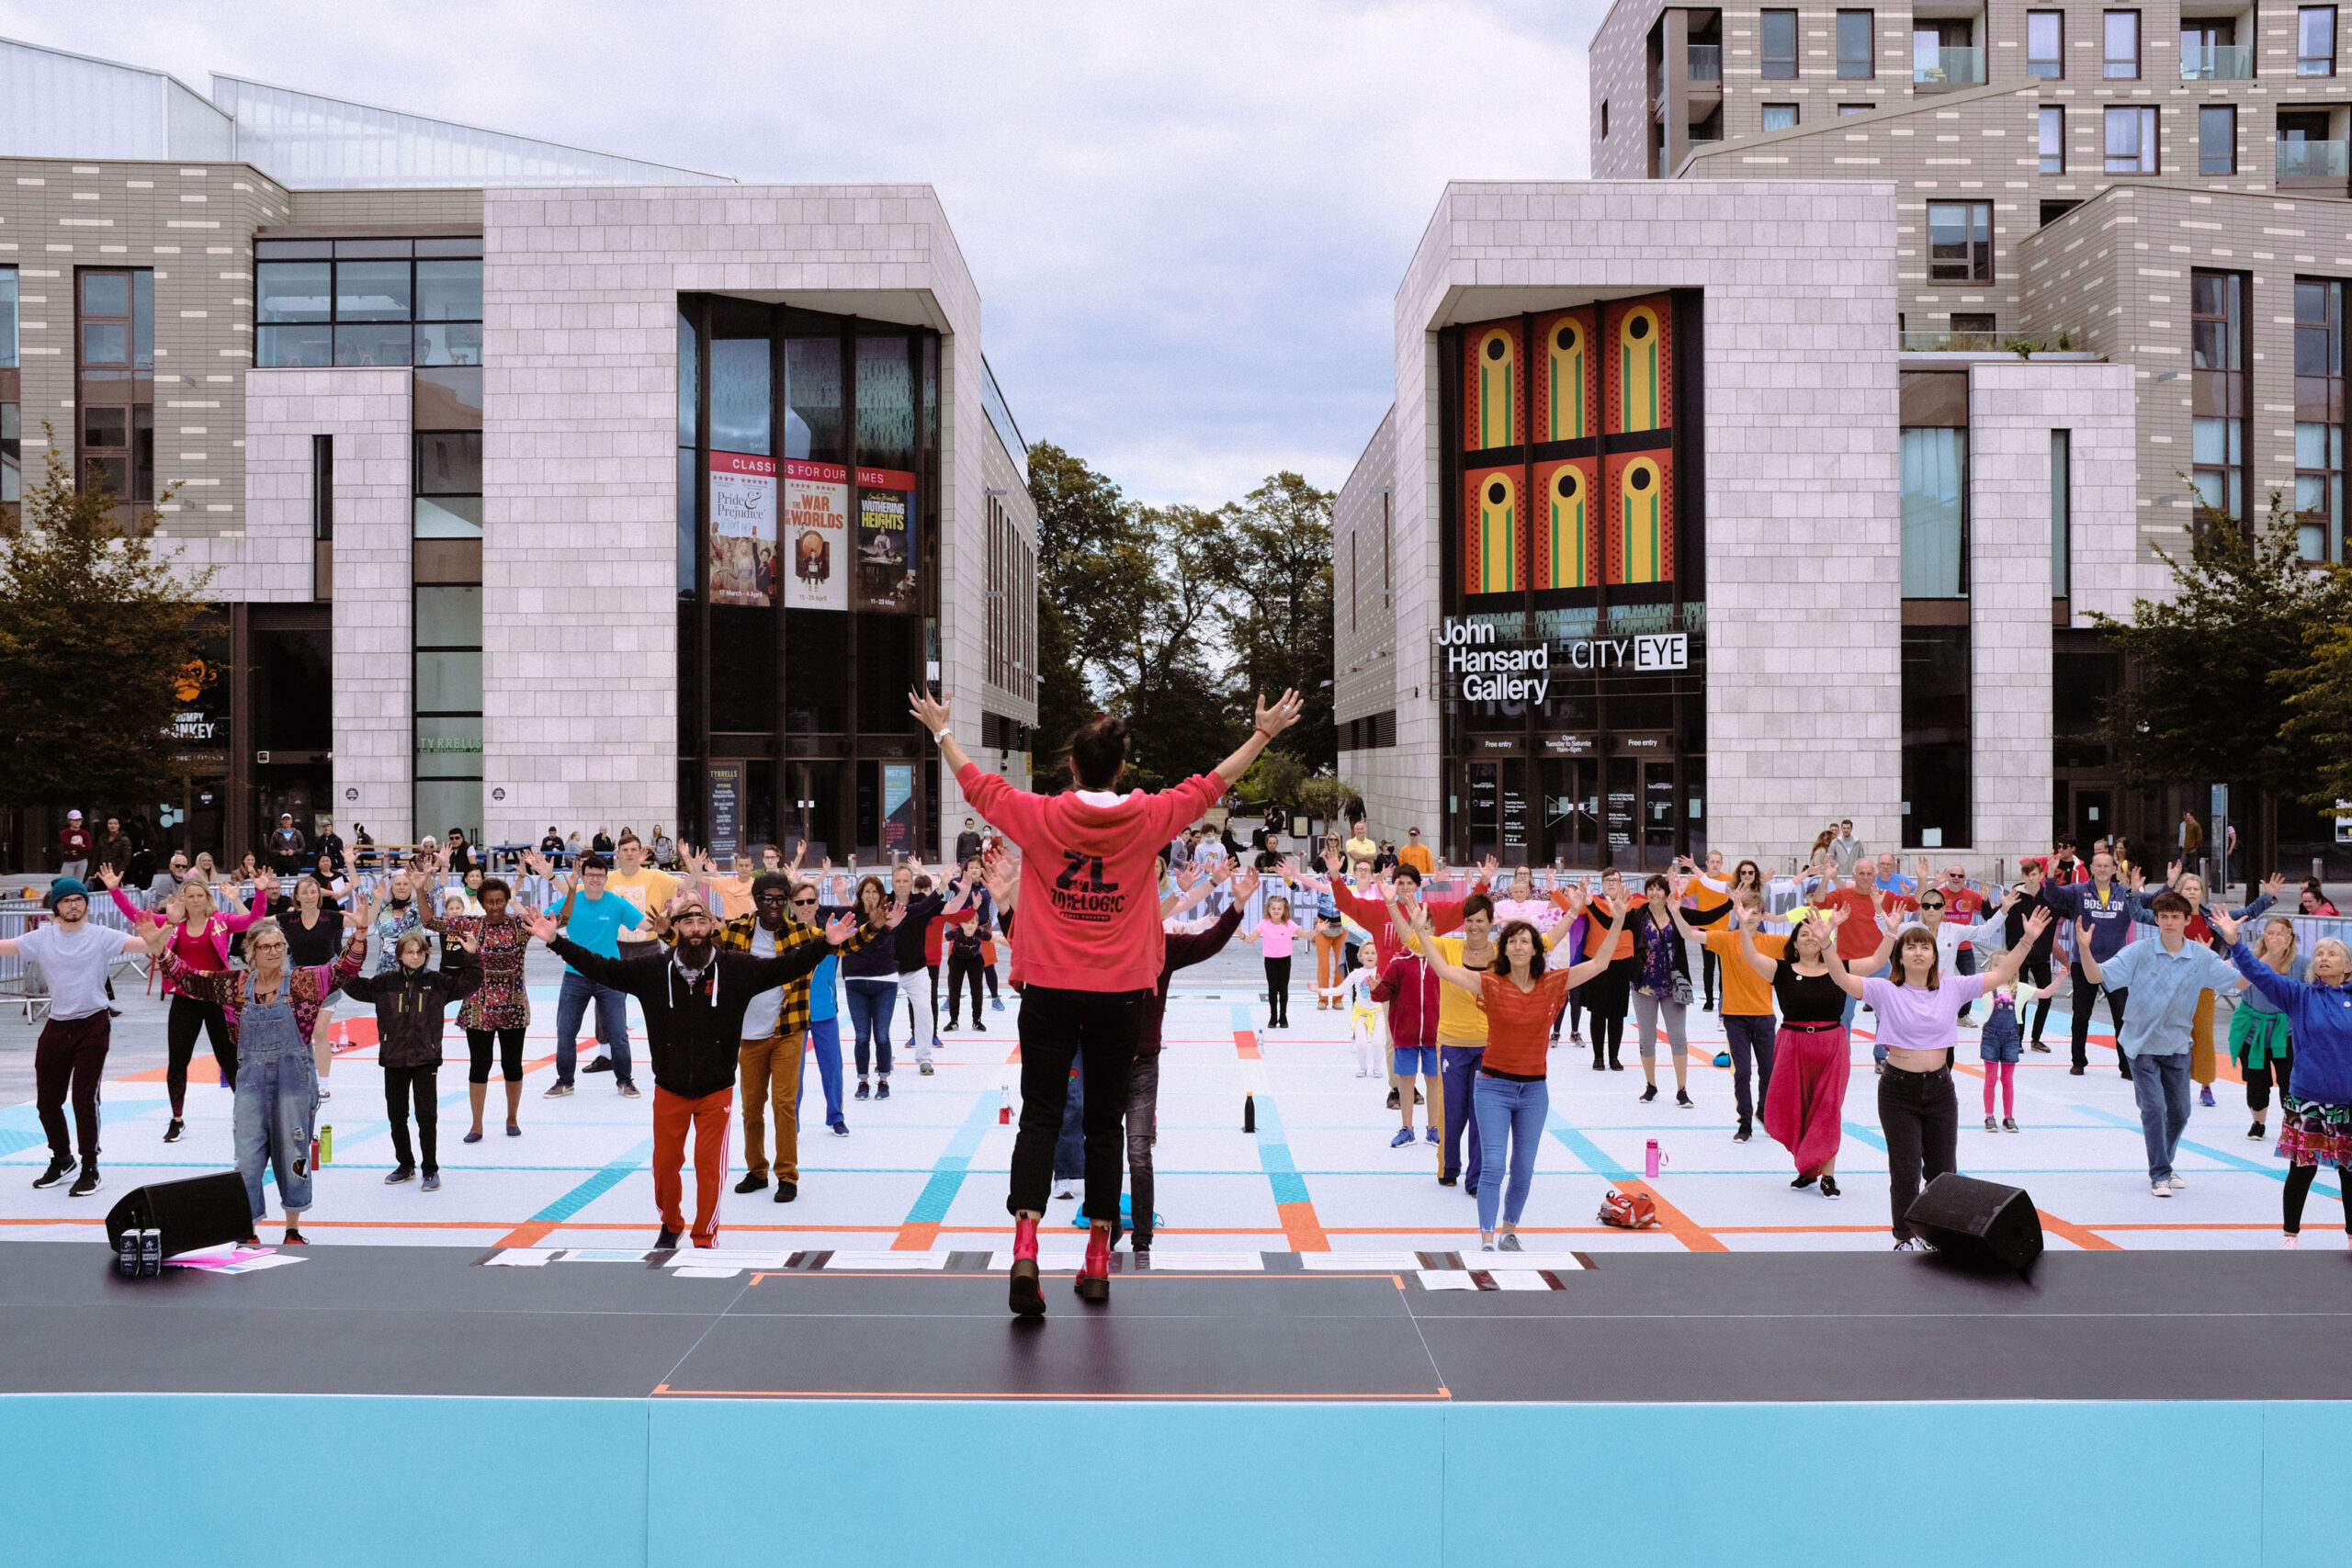 Participants performing in a socially distanced grid all hold their arms up in the air